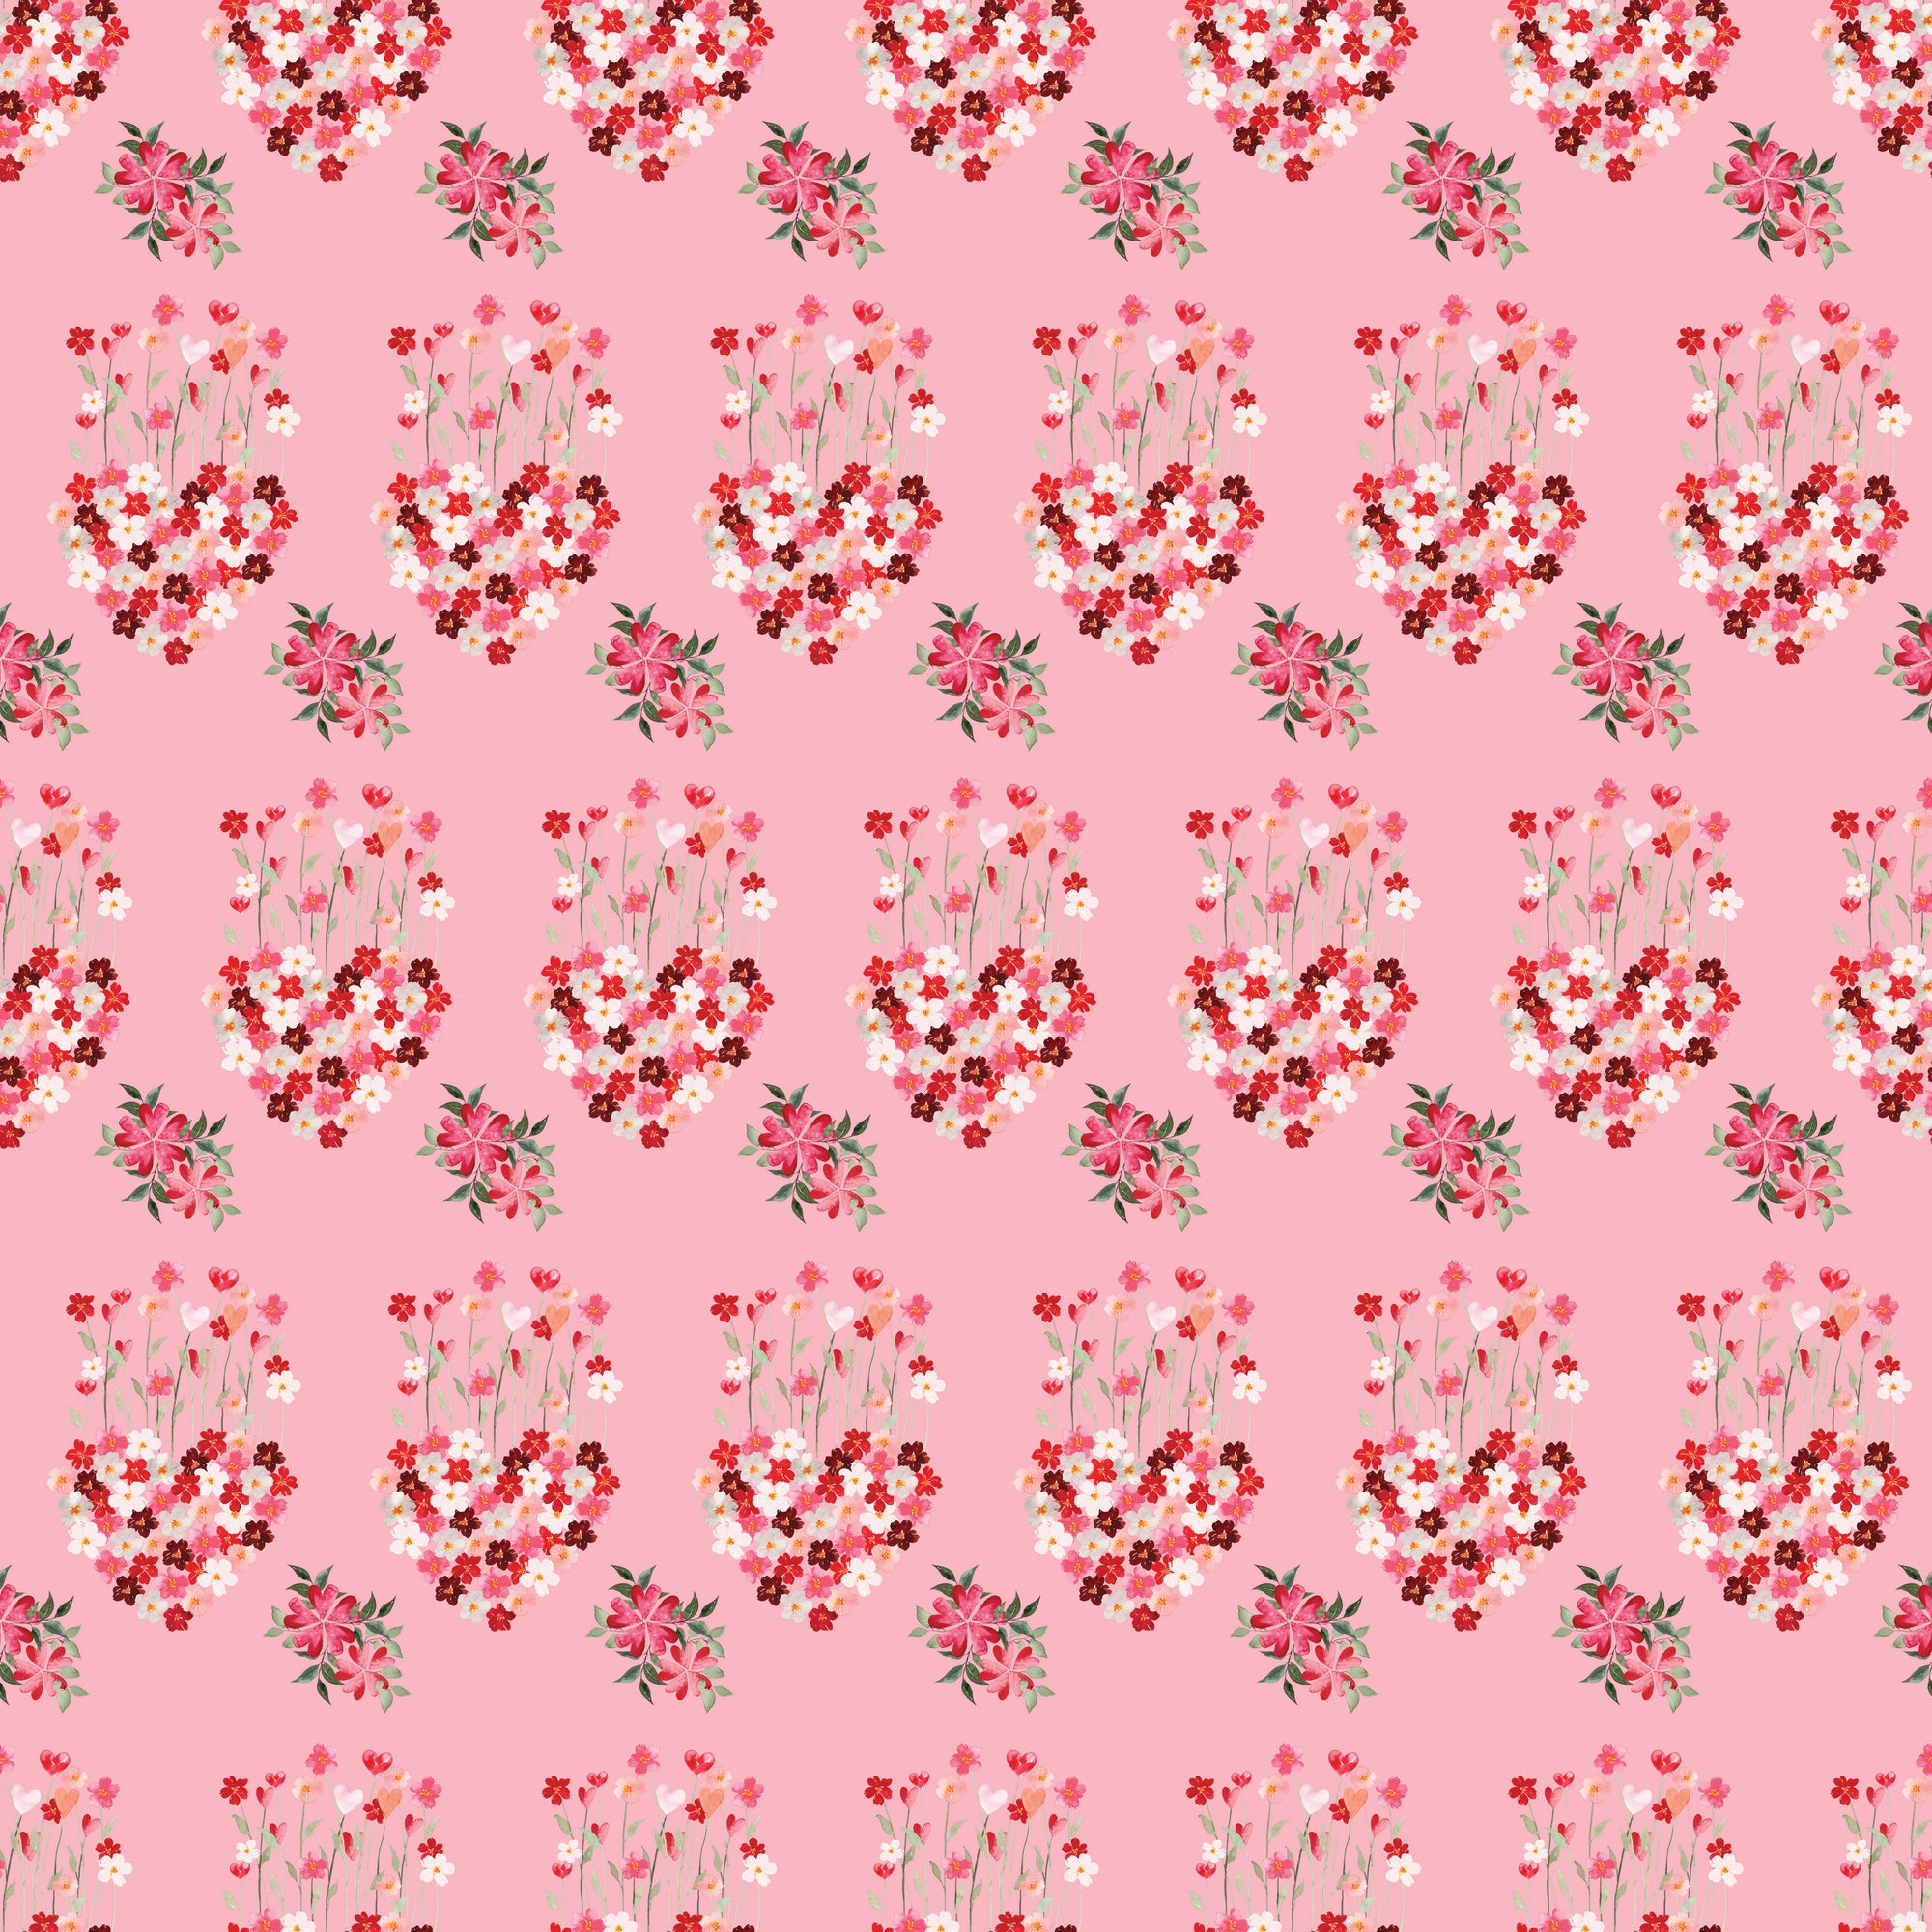 Flower Heart Wrapping Paper, Valentine Wrapping Paper, Wrapping Paper For,  Wrap Your Heart Gifts in Beautiful Wrapping Paper, Wife Gift 